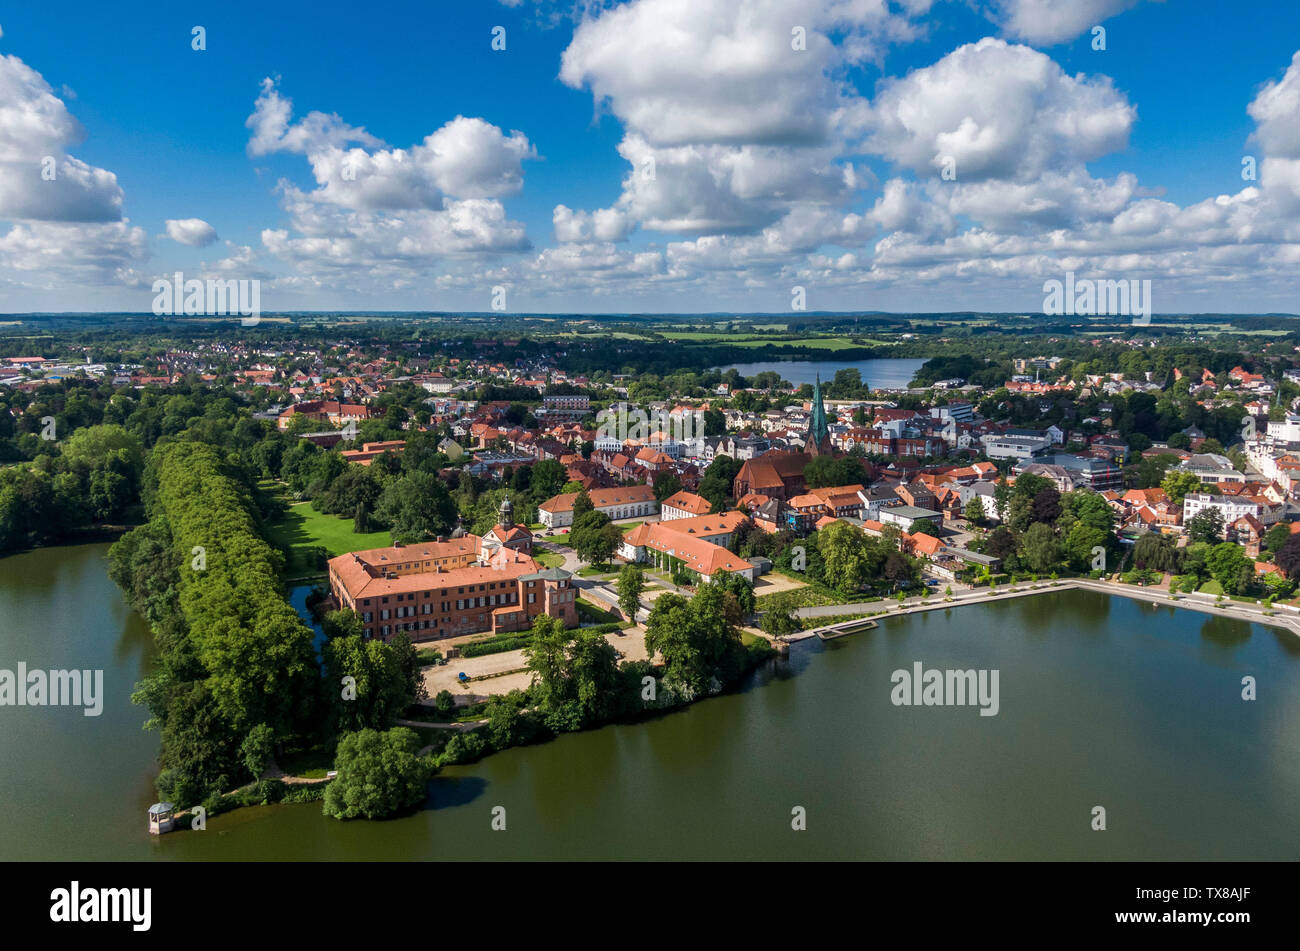 Aerial view of Eutin city in Germany Stock Photo